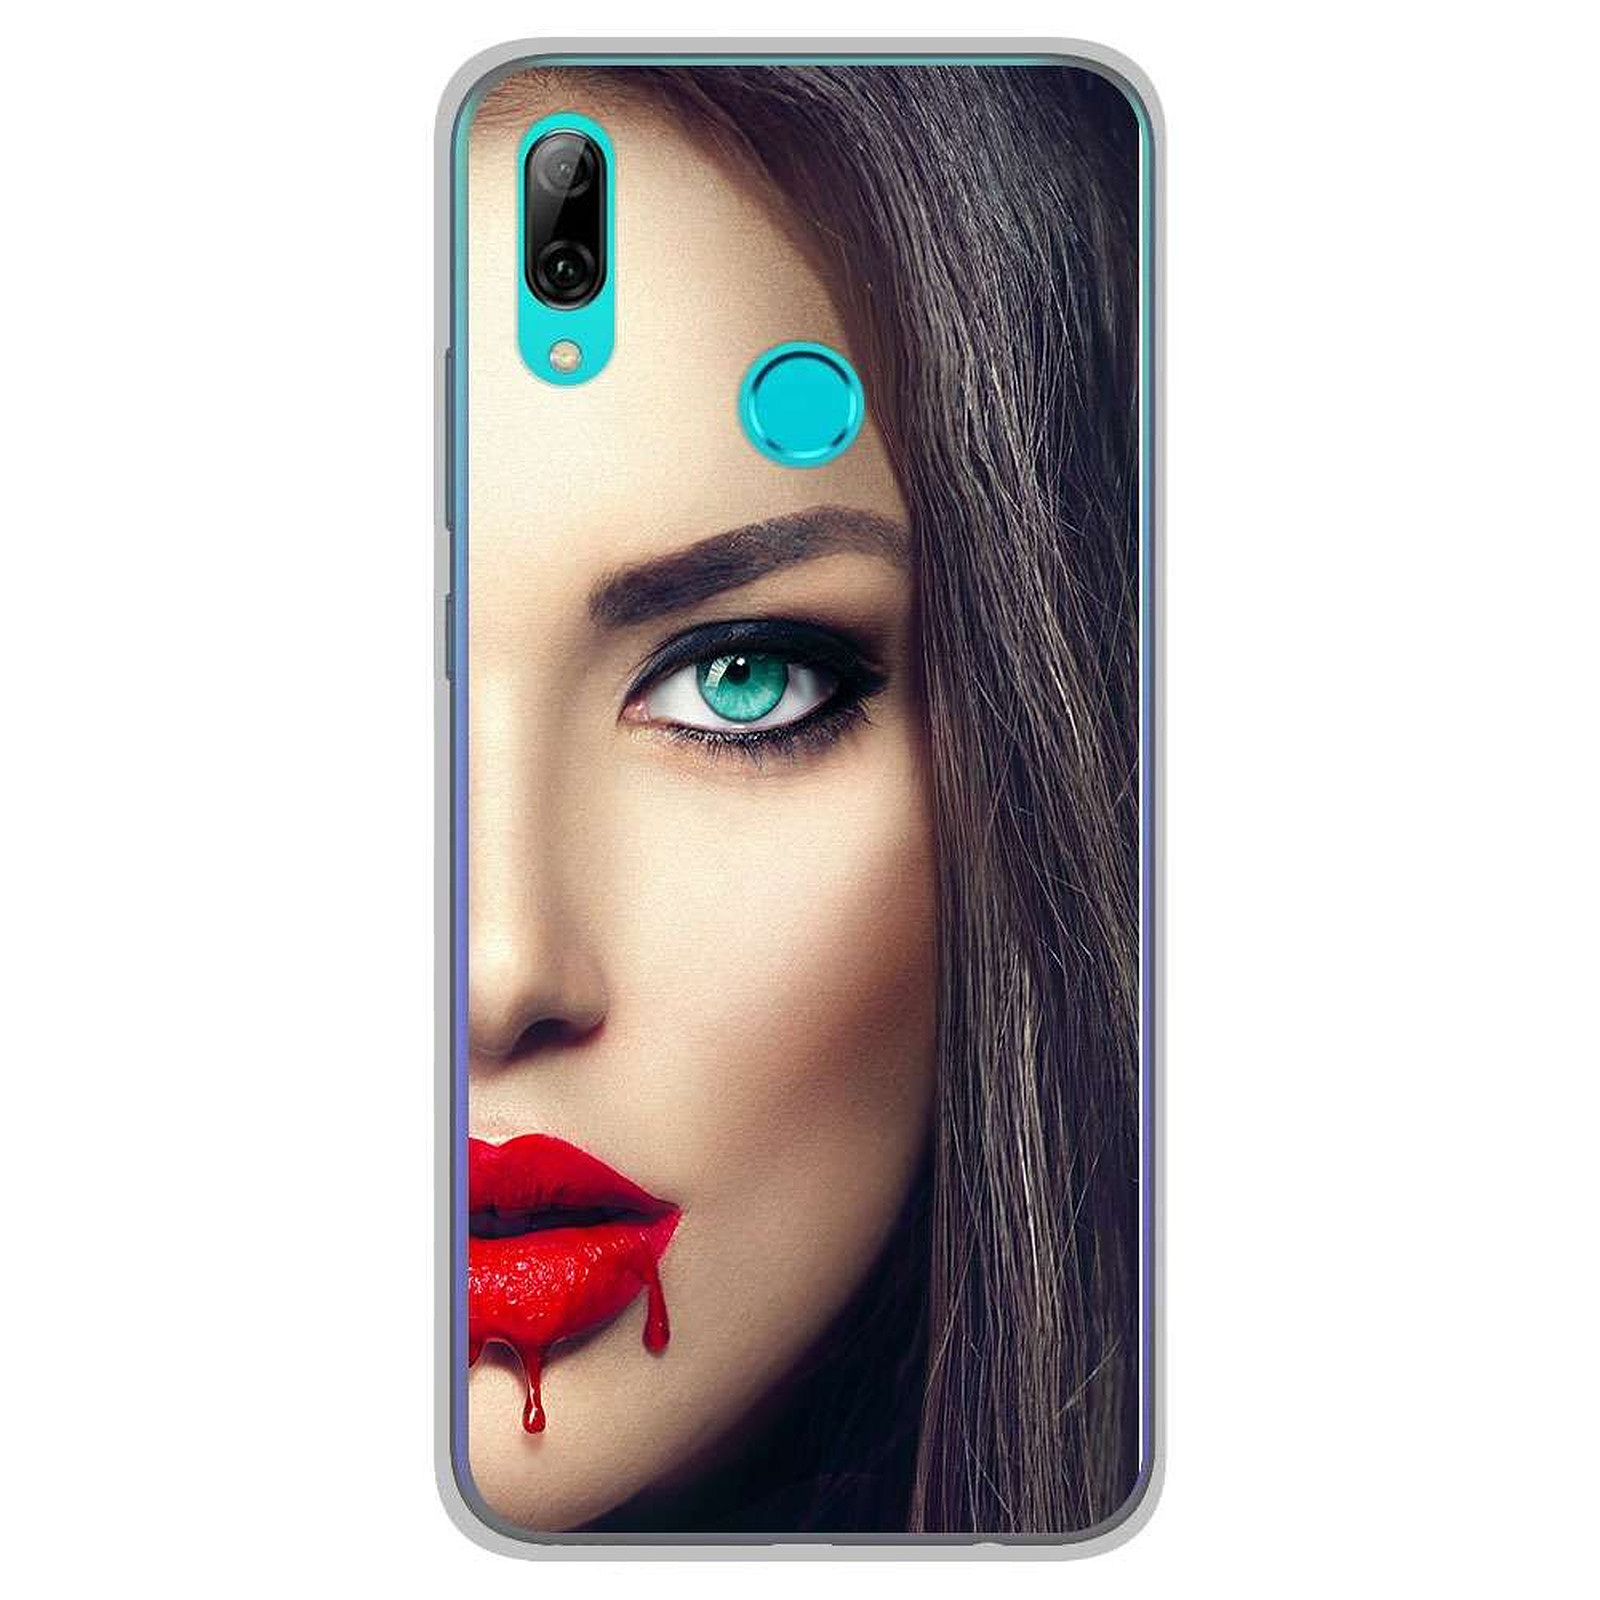 1001 Coques Coque silicone gel Huawei P Smart 2019 motif Lèvres Sang - Coque telephone 1001Coques